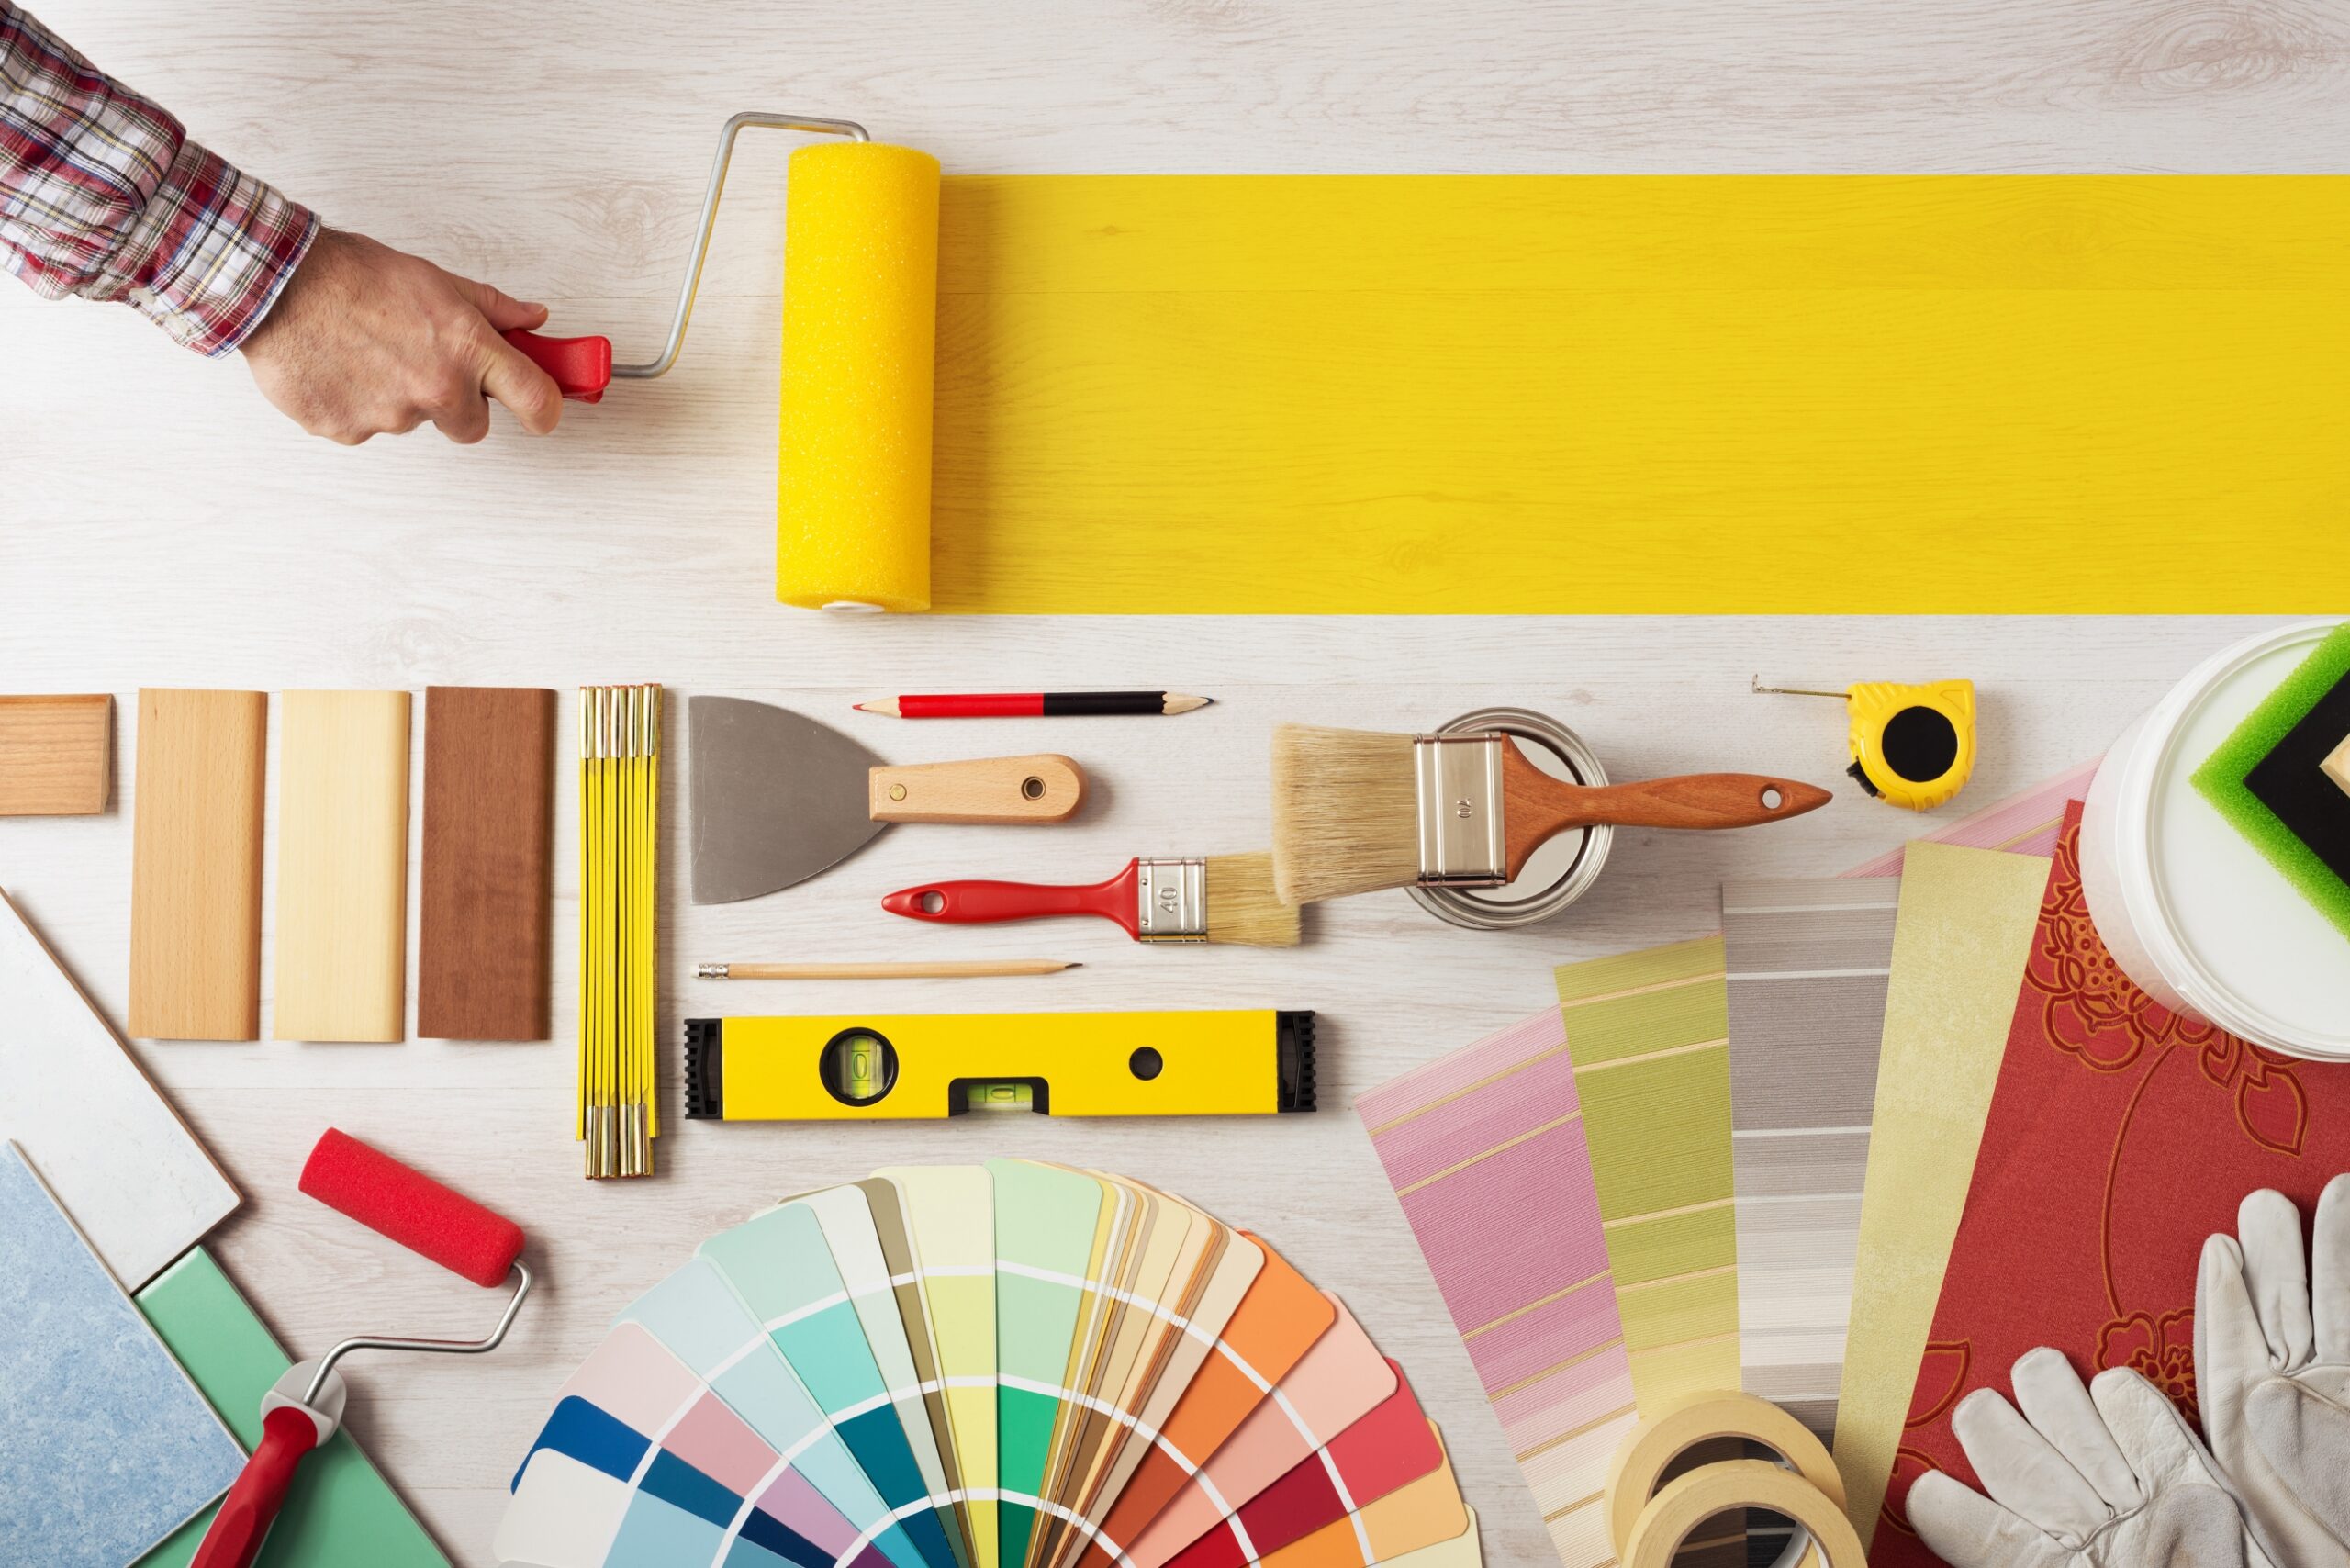 How to prep for your next house painting project